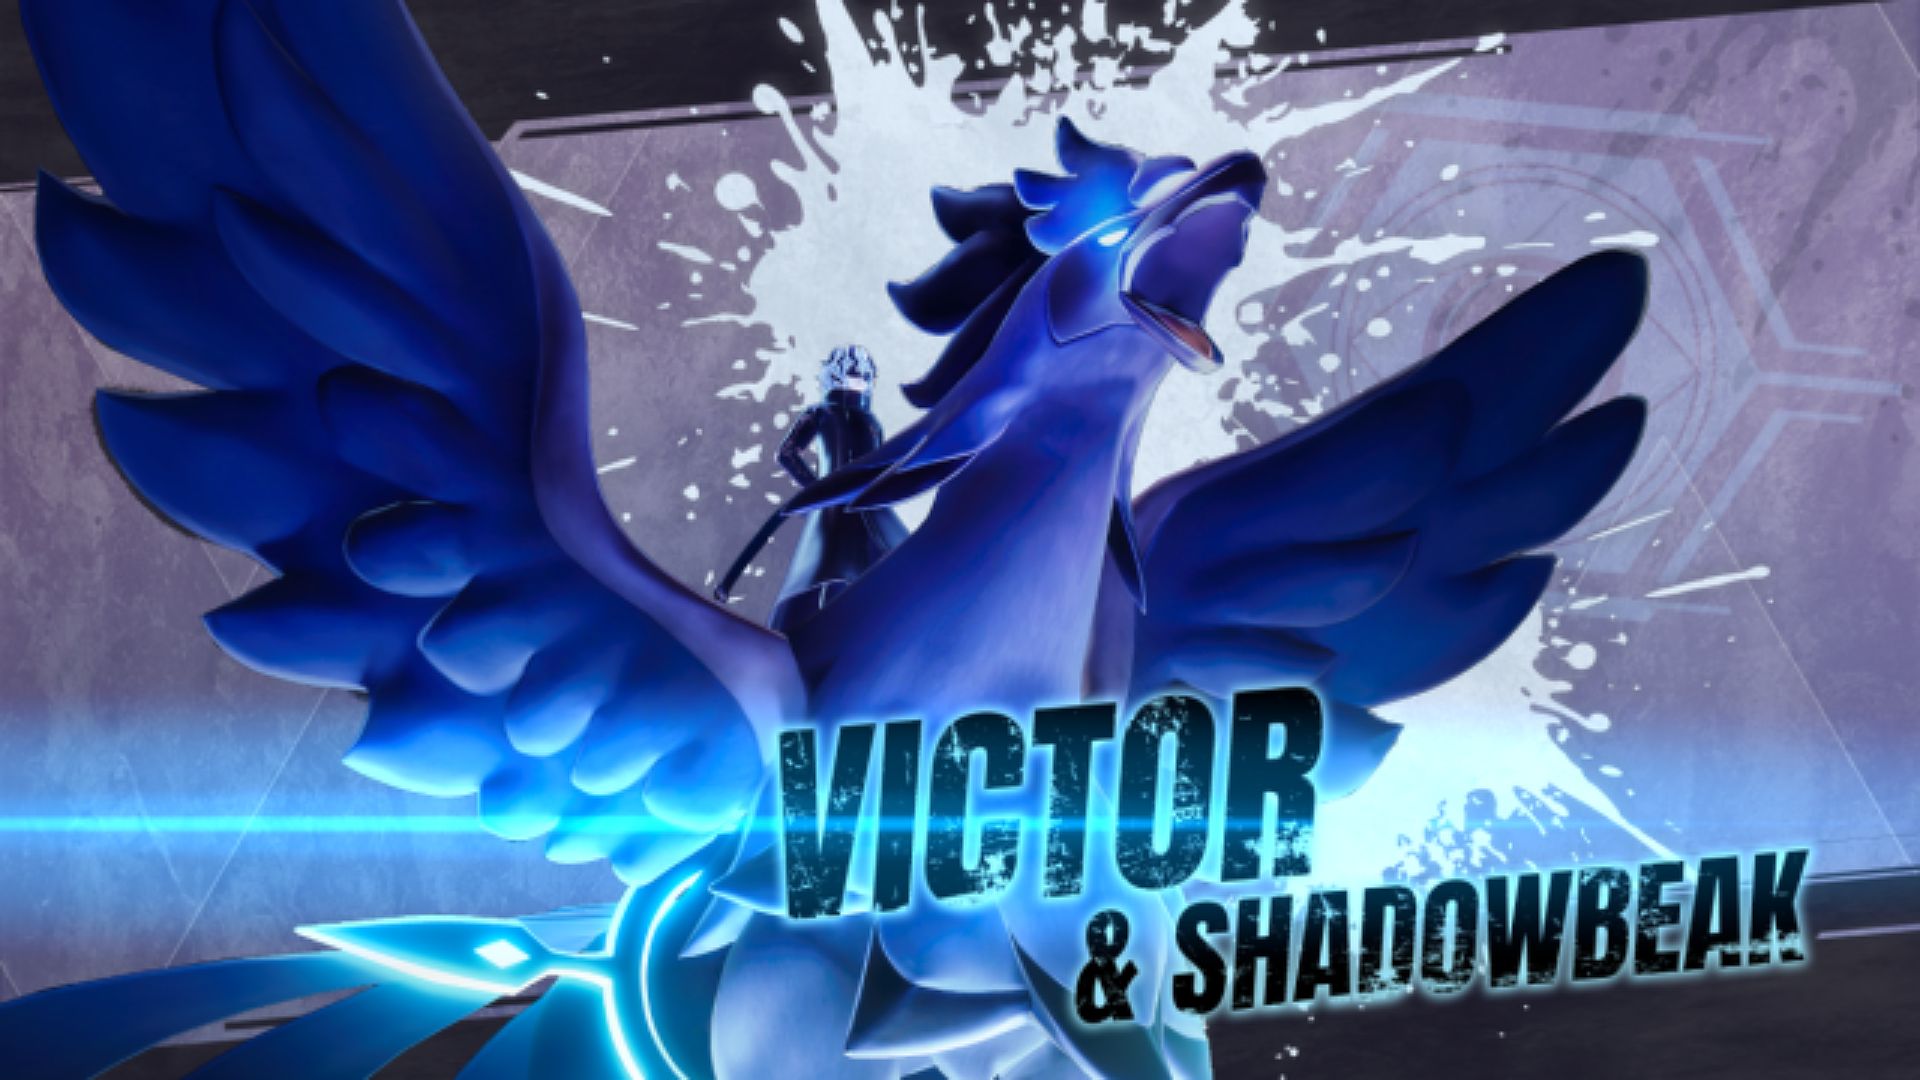 Victor and Shadowbeak boss fight screen in Palworld